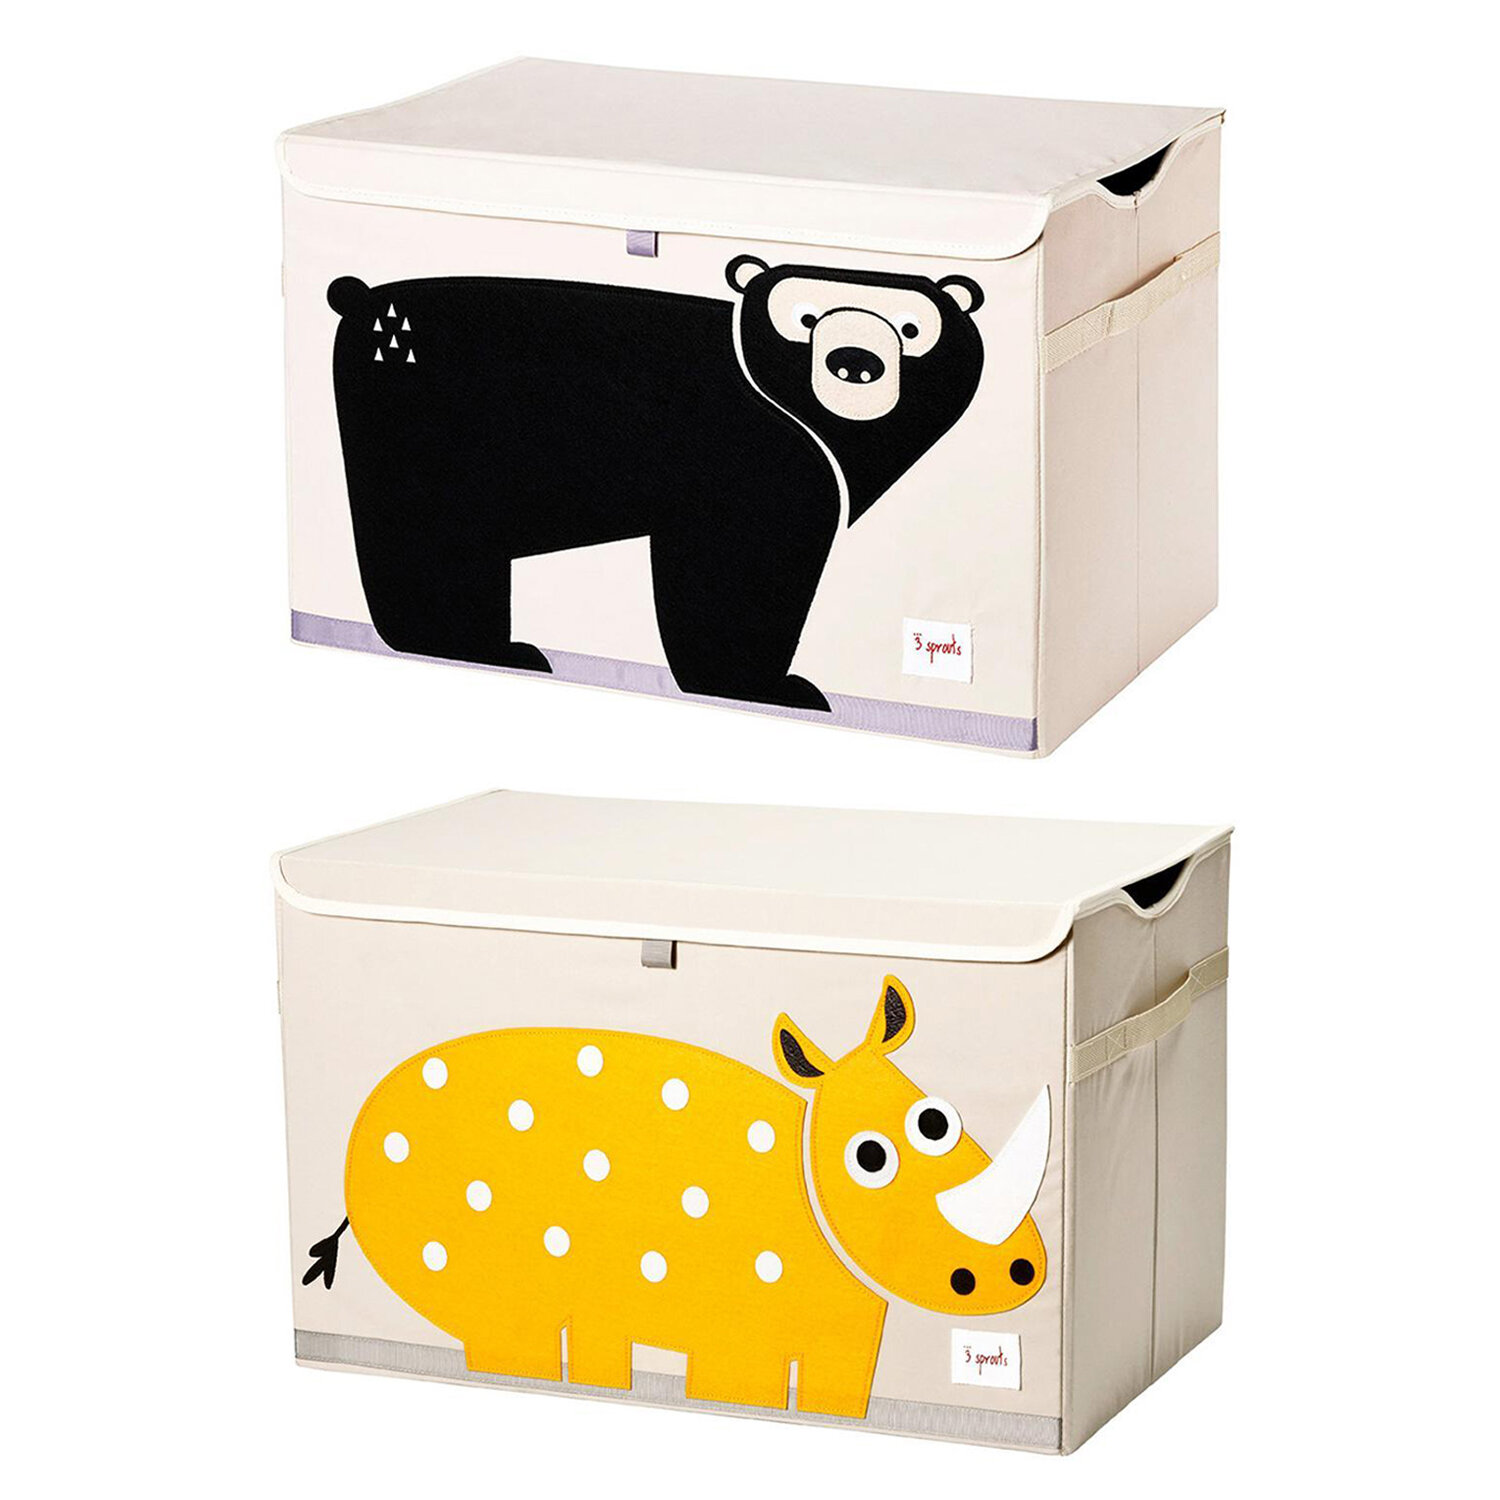 3 Sprouts Plastic Toy Box & Reviews